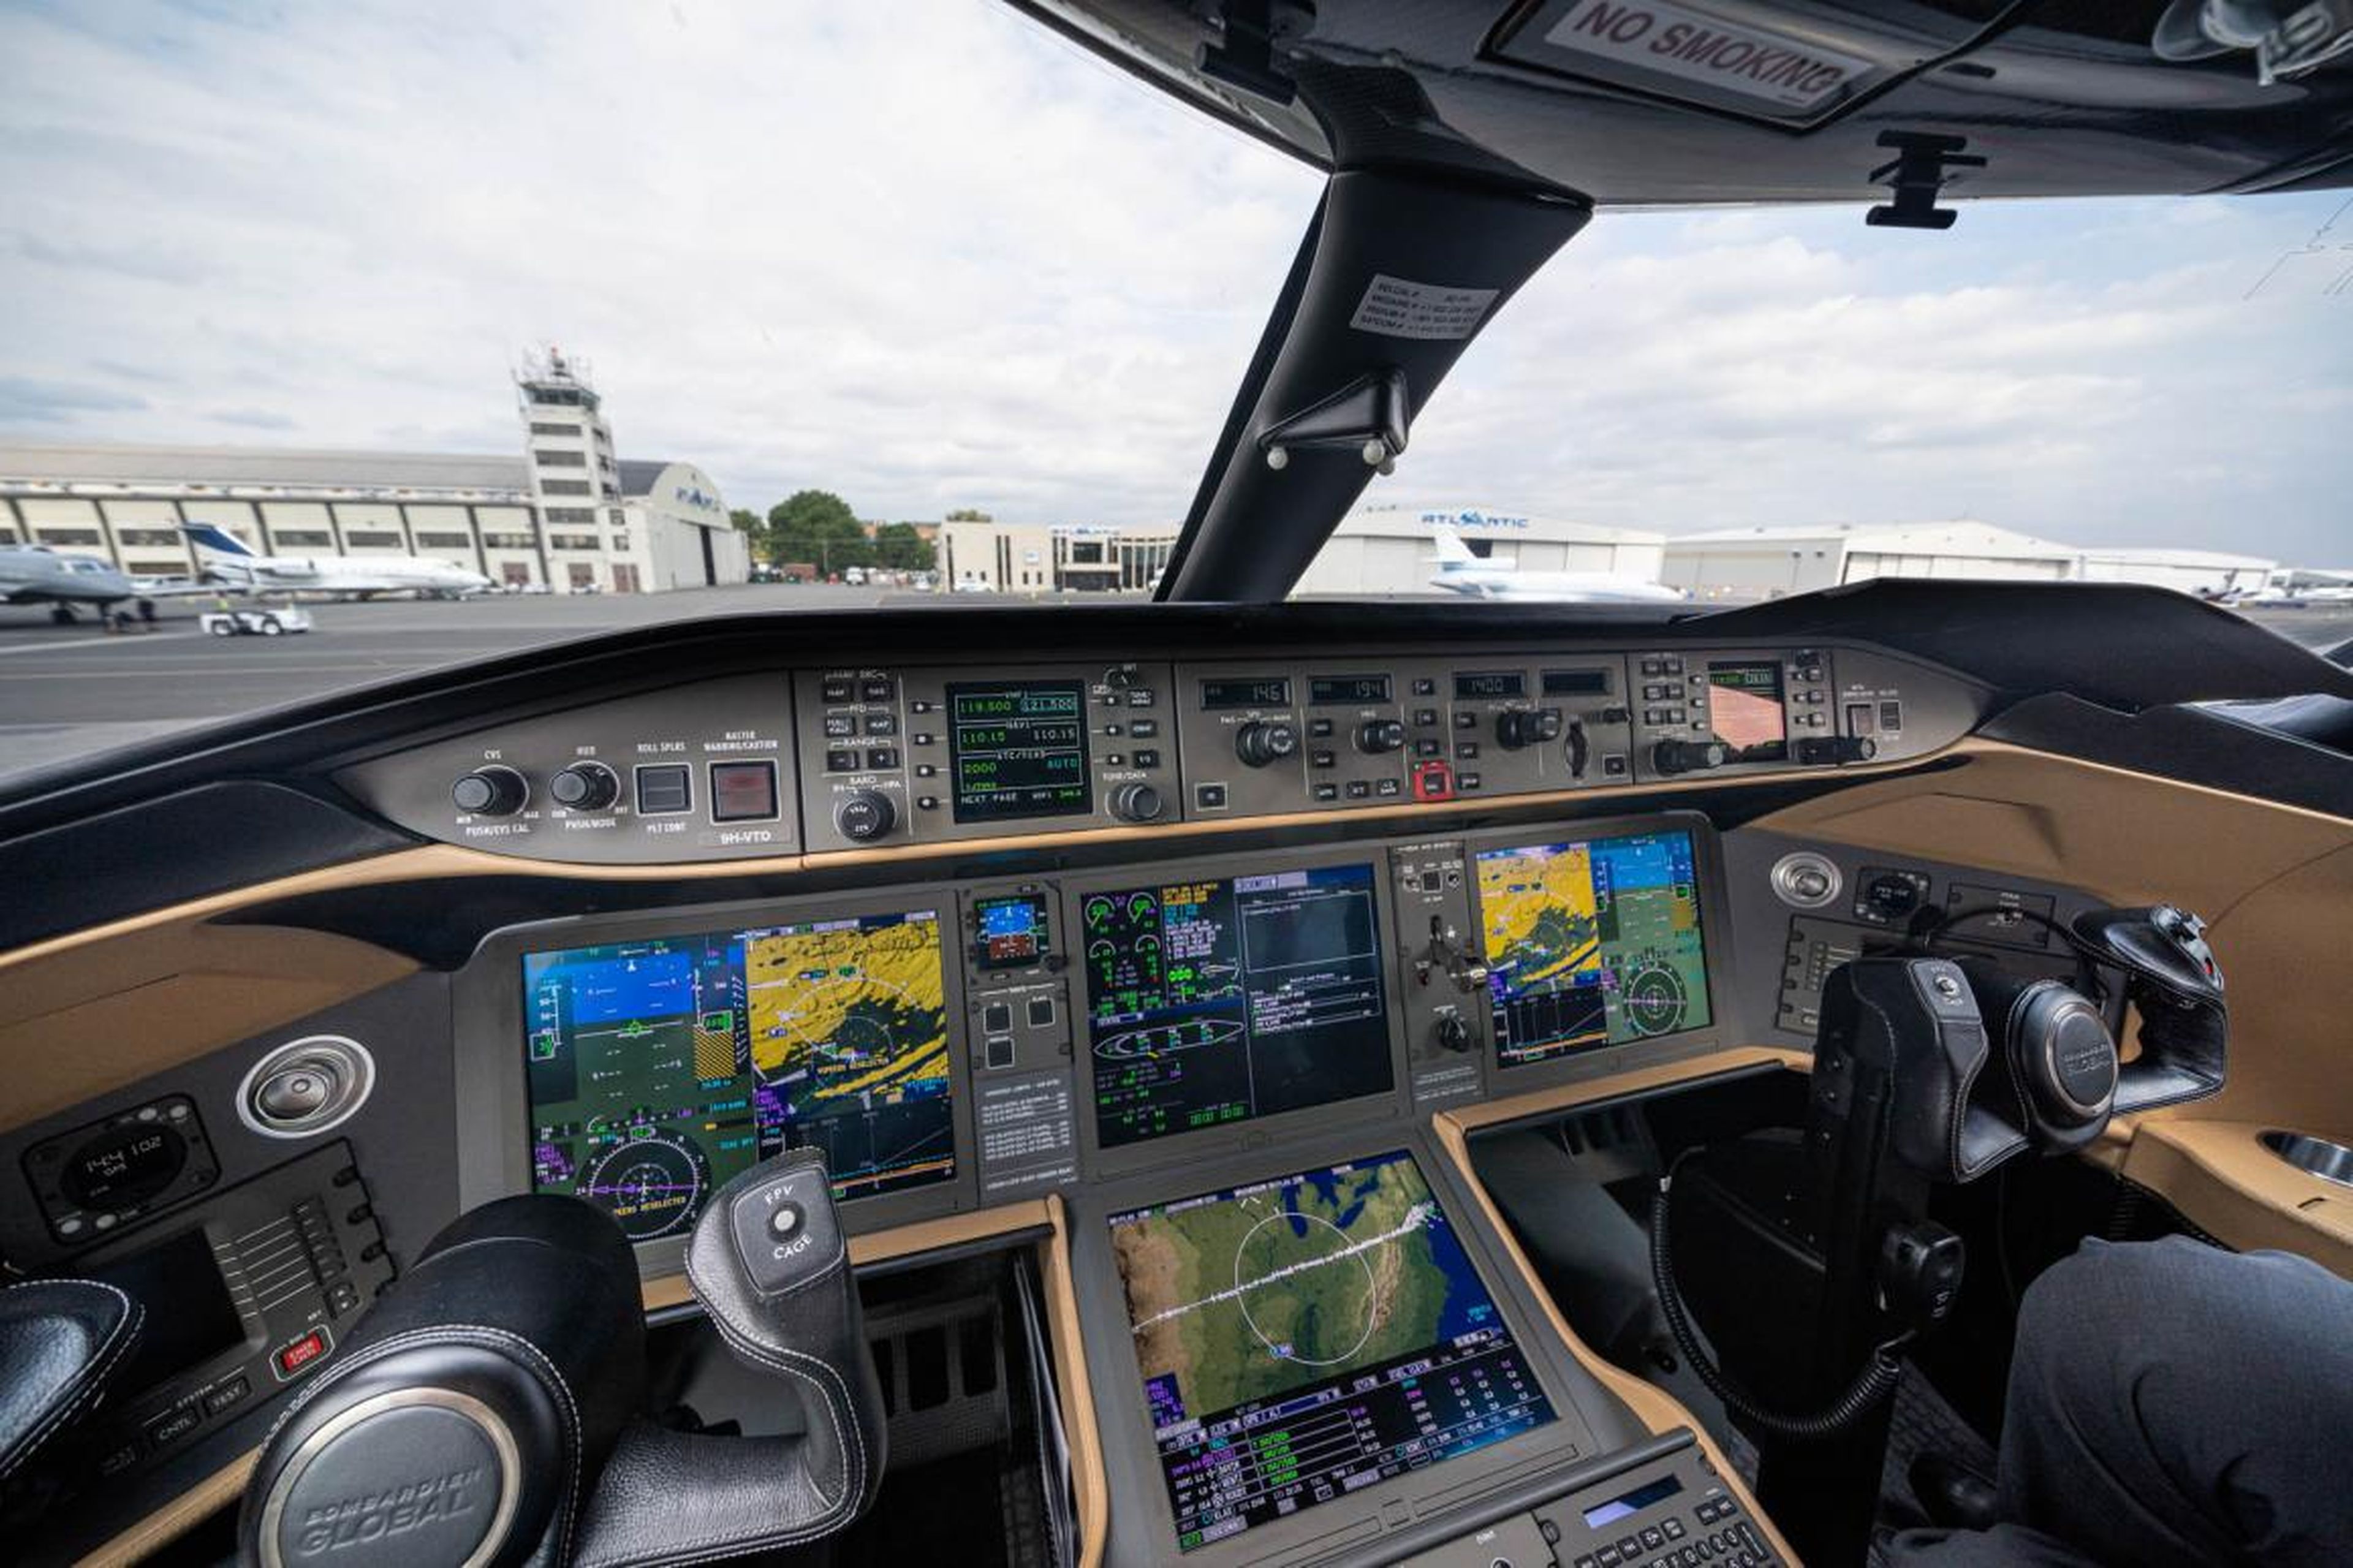 The flight deck is similarly high-tech, with advanced avionics displays and controls ...